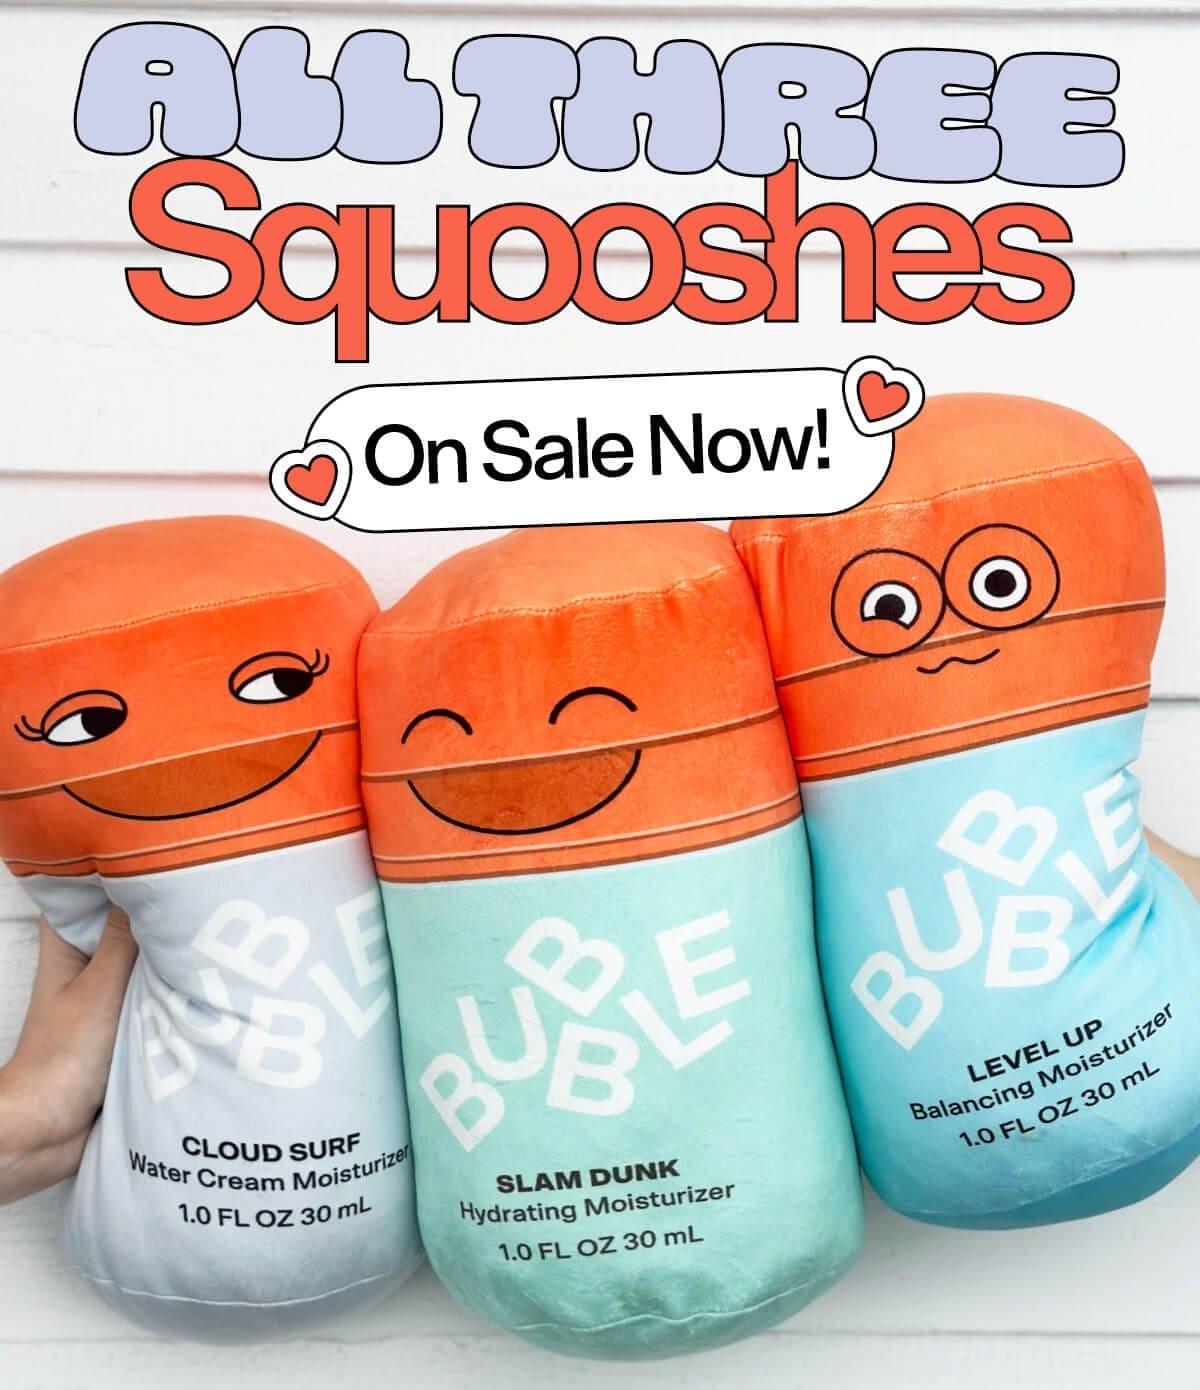 All Three Squooshes On Sale Now